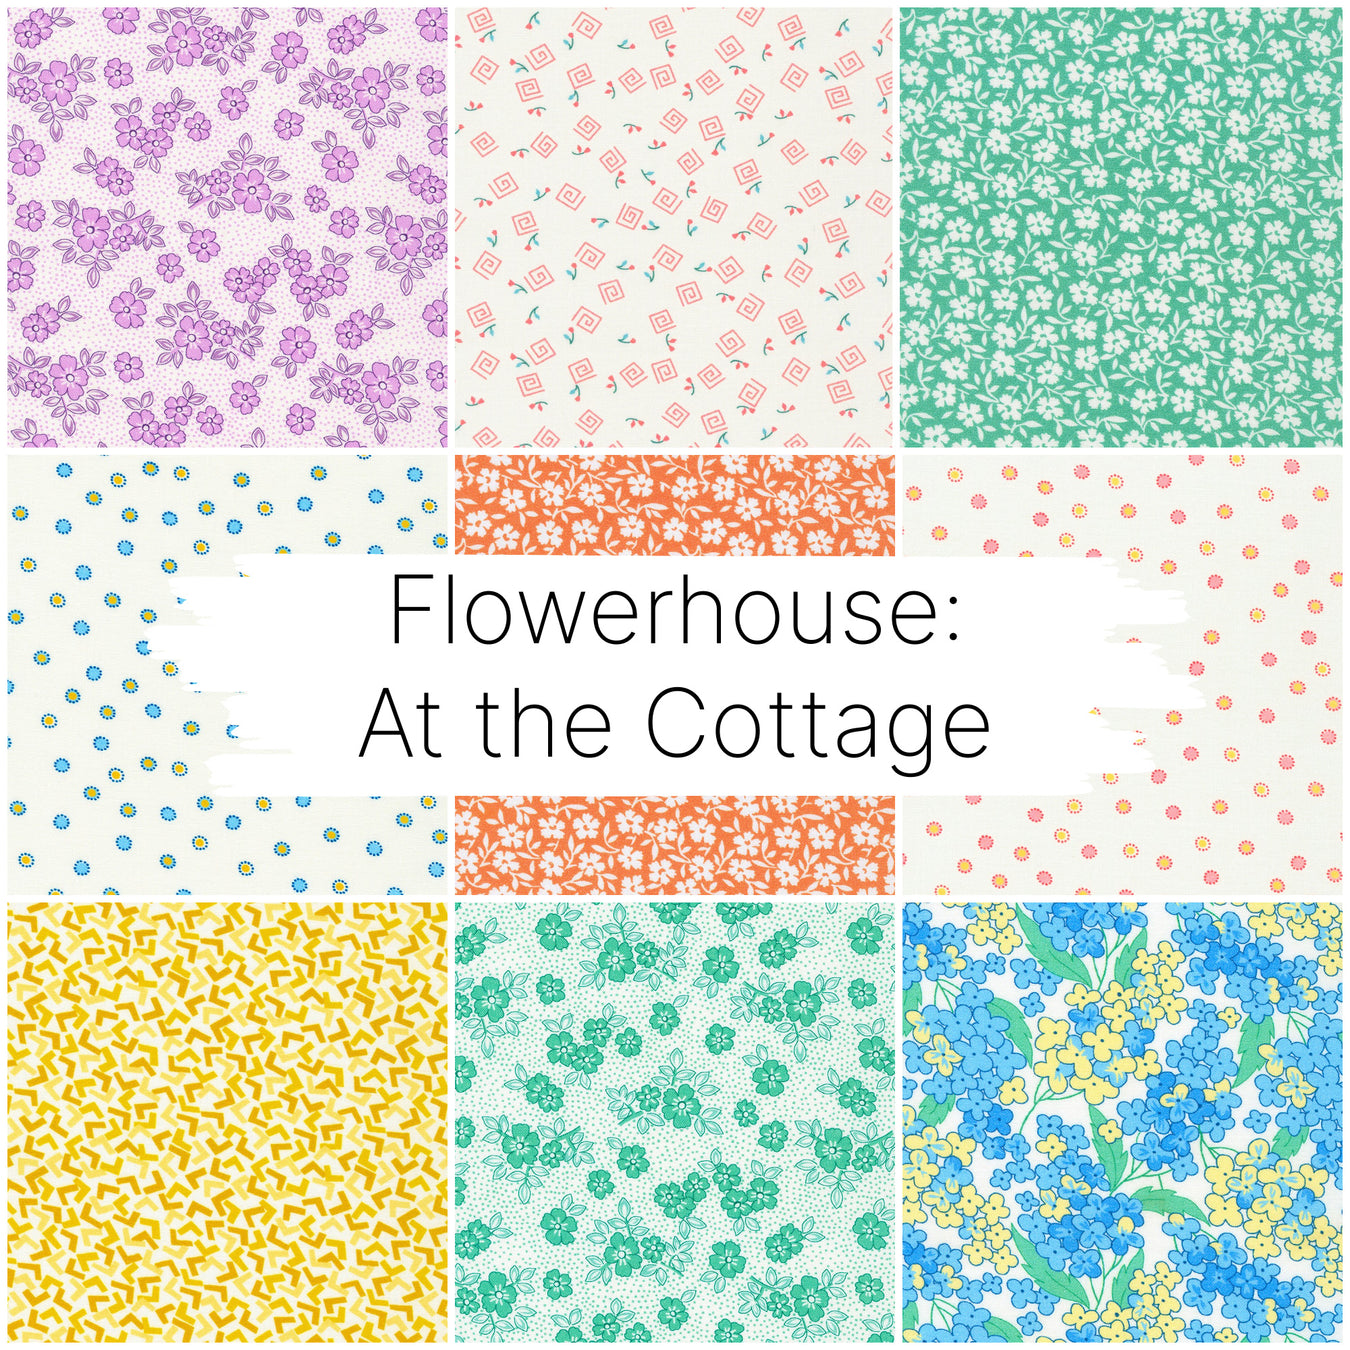 Flowerhouse: At the Cottage